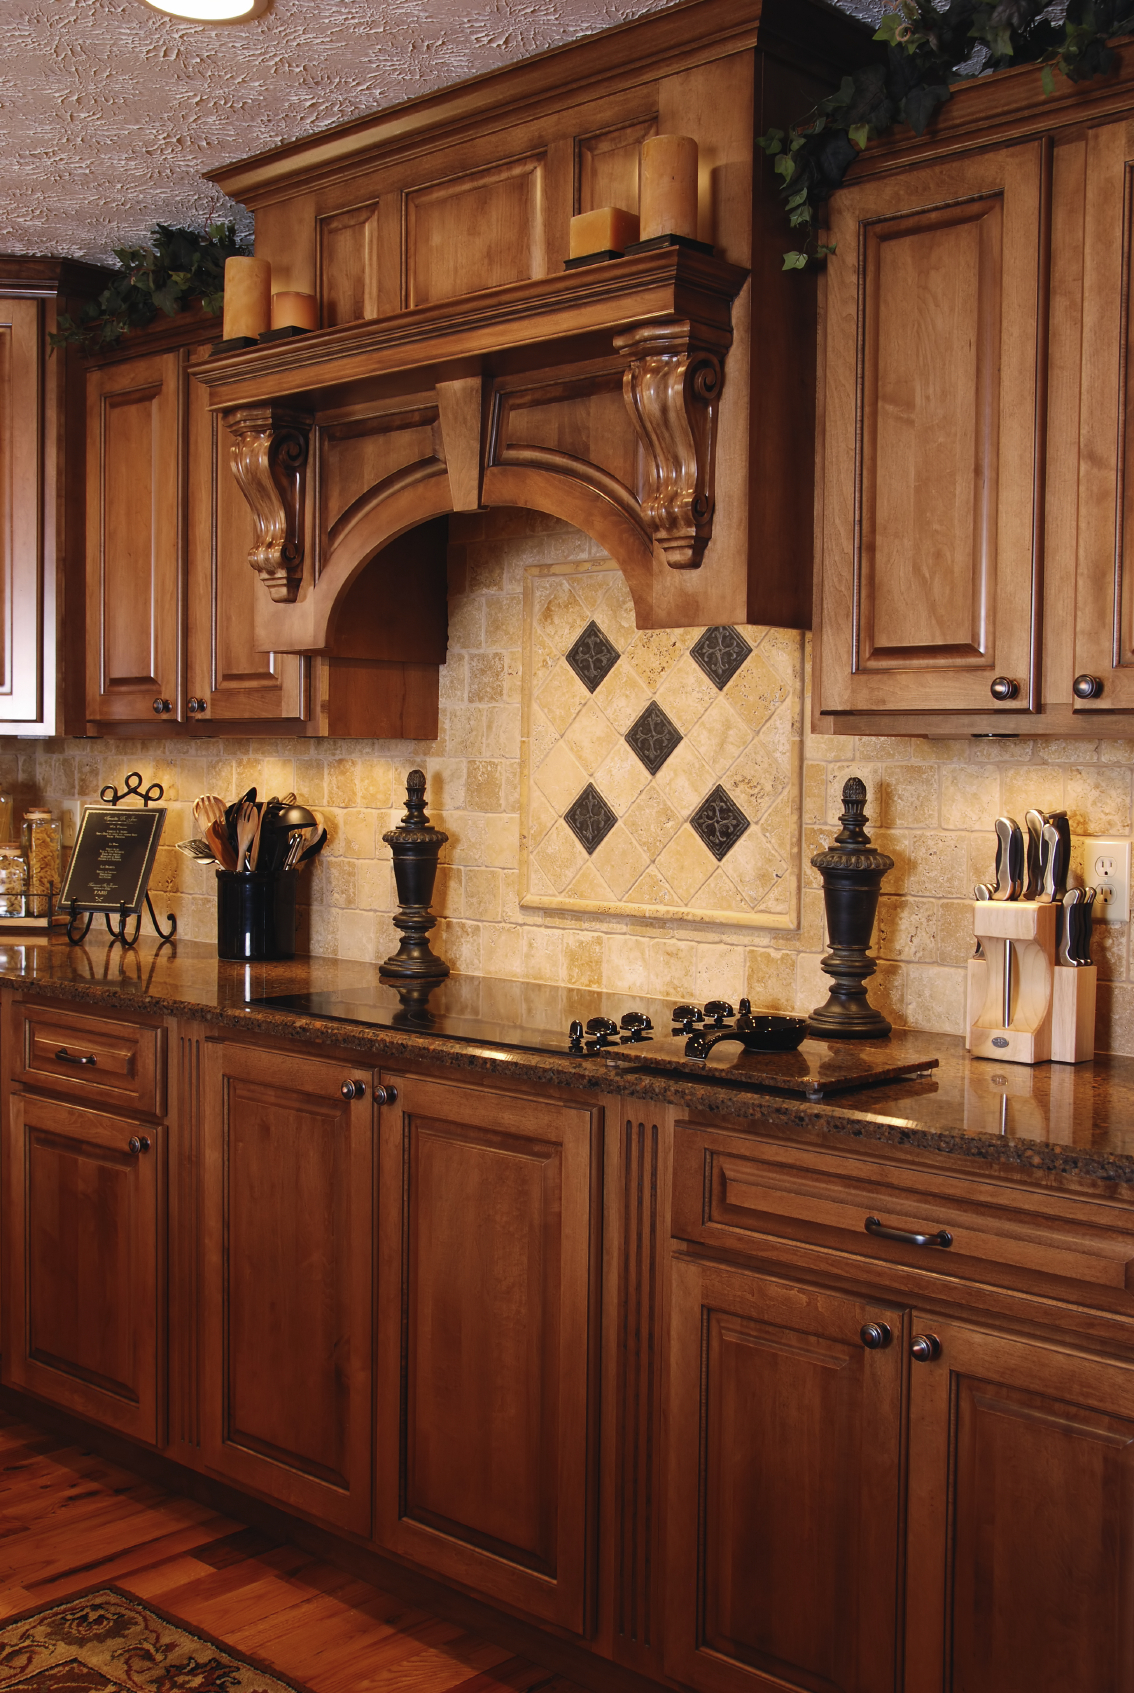 Do You Need Custom Kitchen Cabinets For